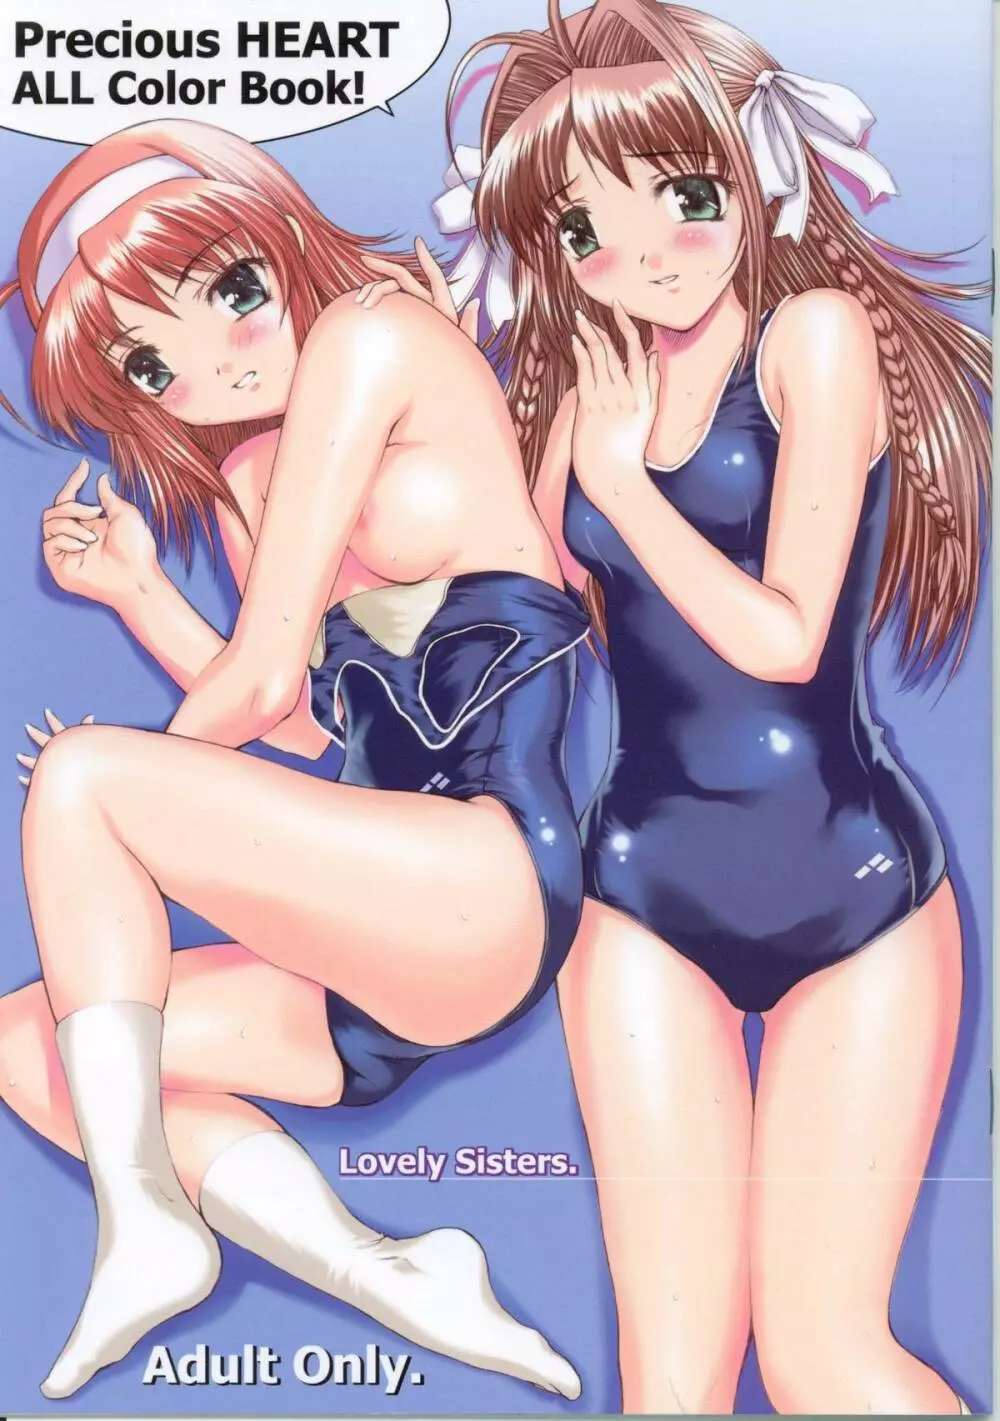 Lovely Sisters. - page1